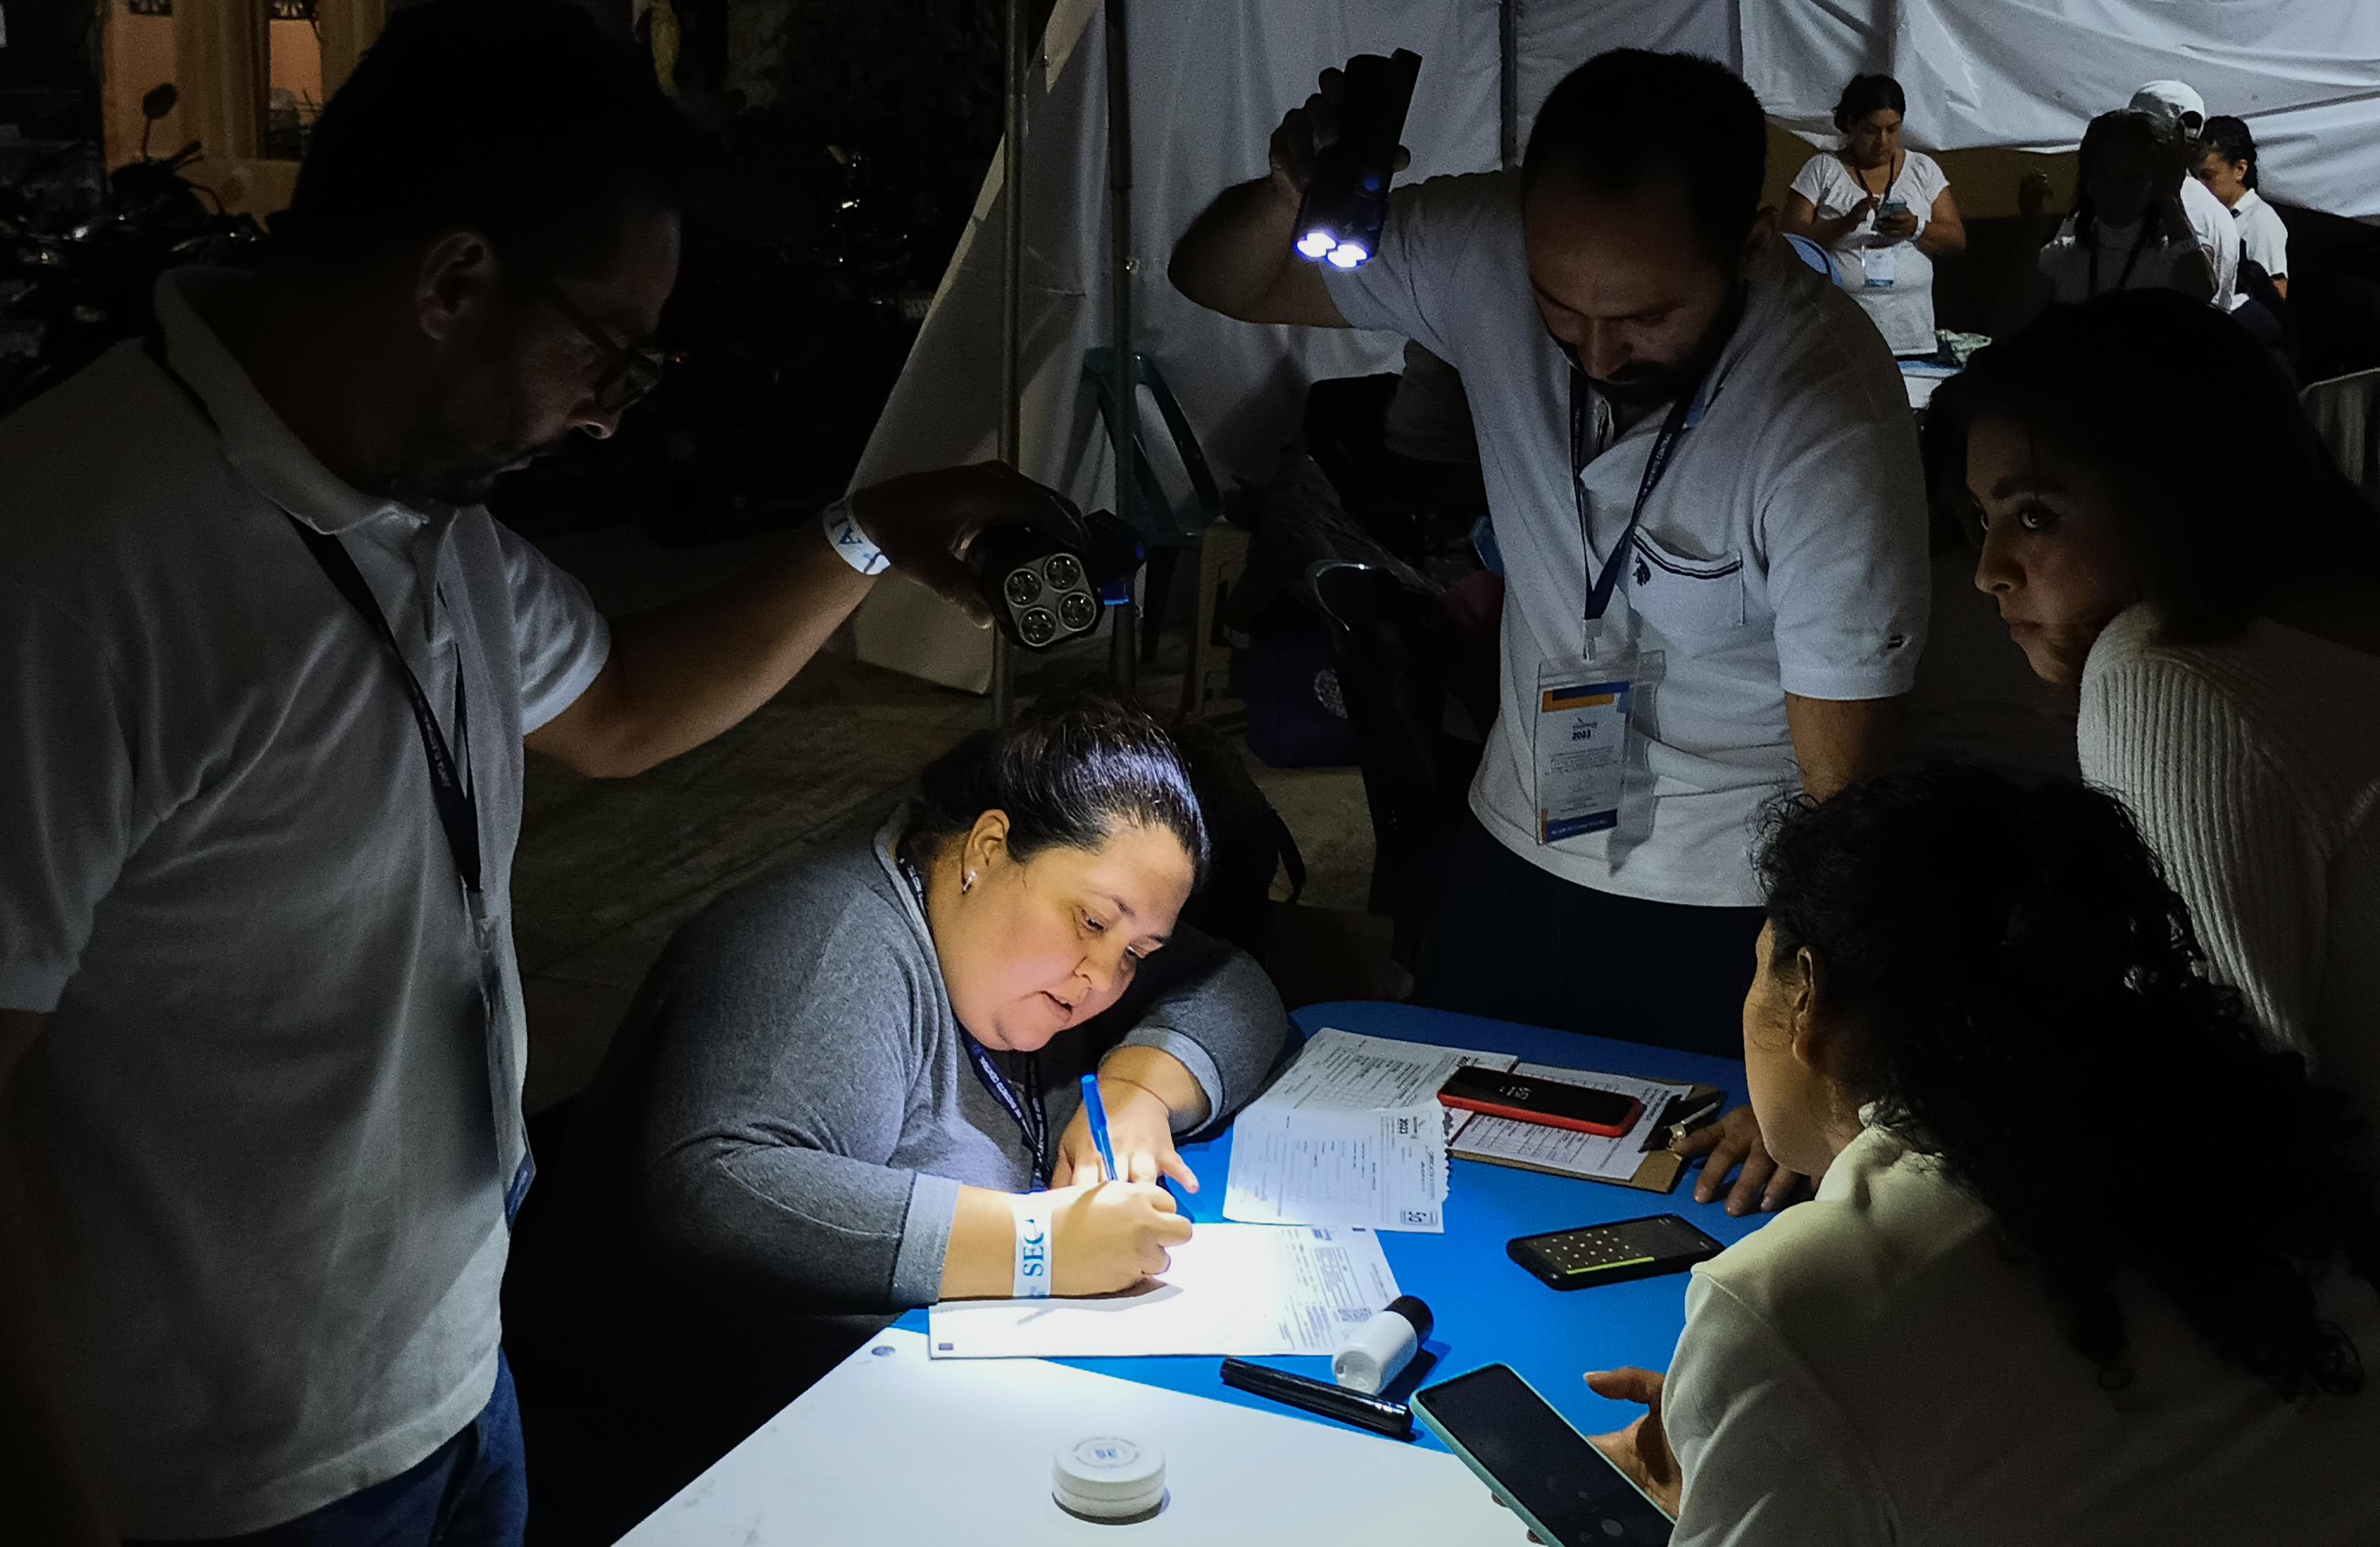 A vote counter in Zone 7 of Guatemala City completes a vote tabulation act by flashlight. Semilla received 128 votes, far greater than the 14 allotted to UNE. Photo José Luis Sanz